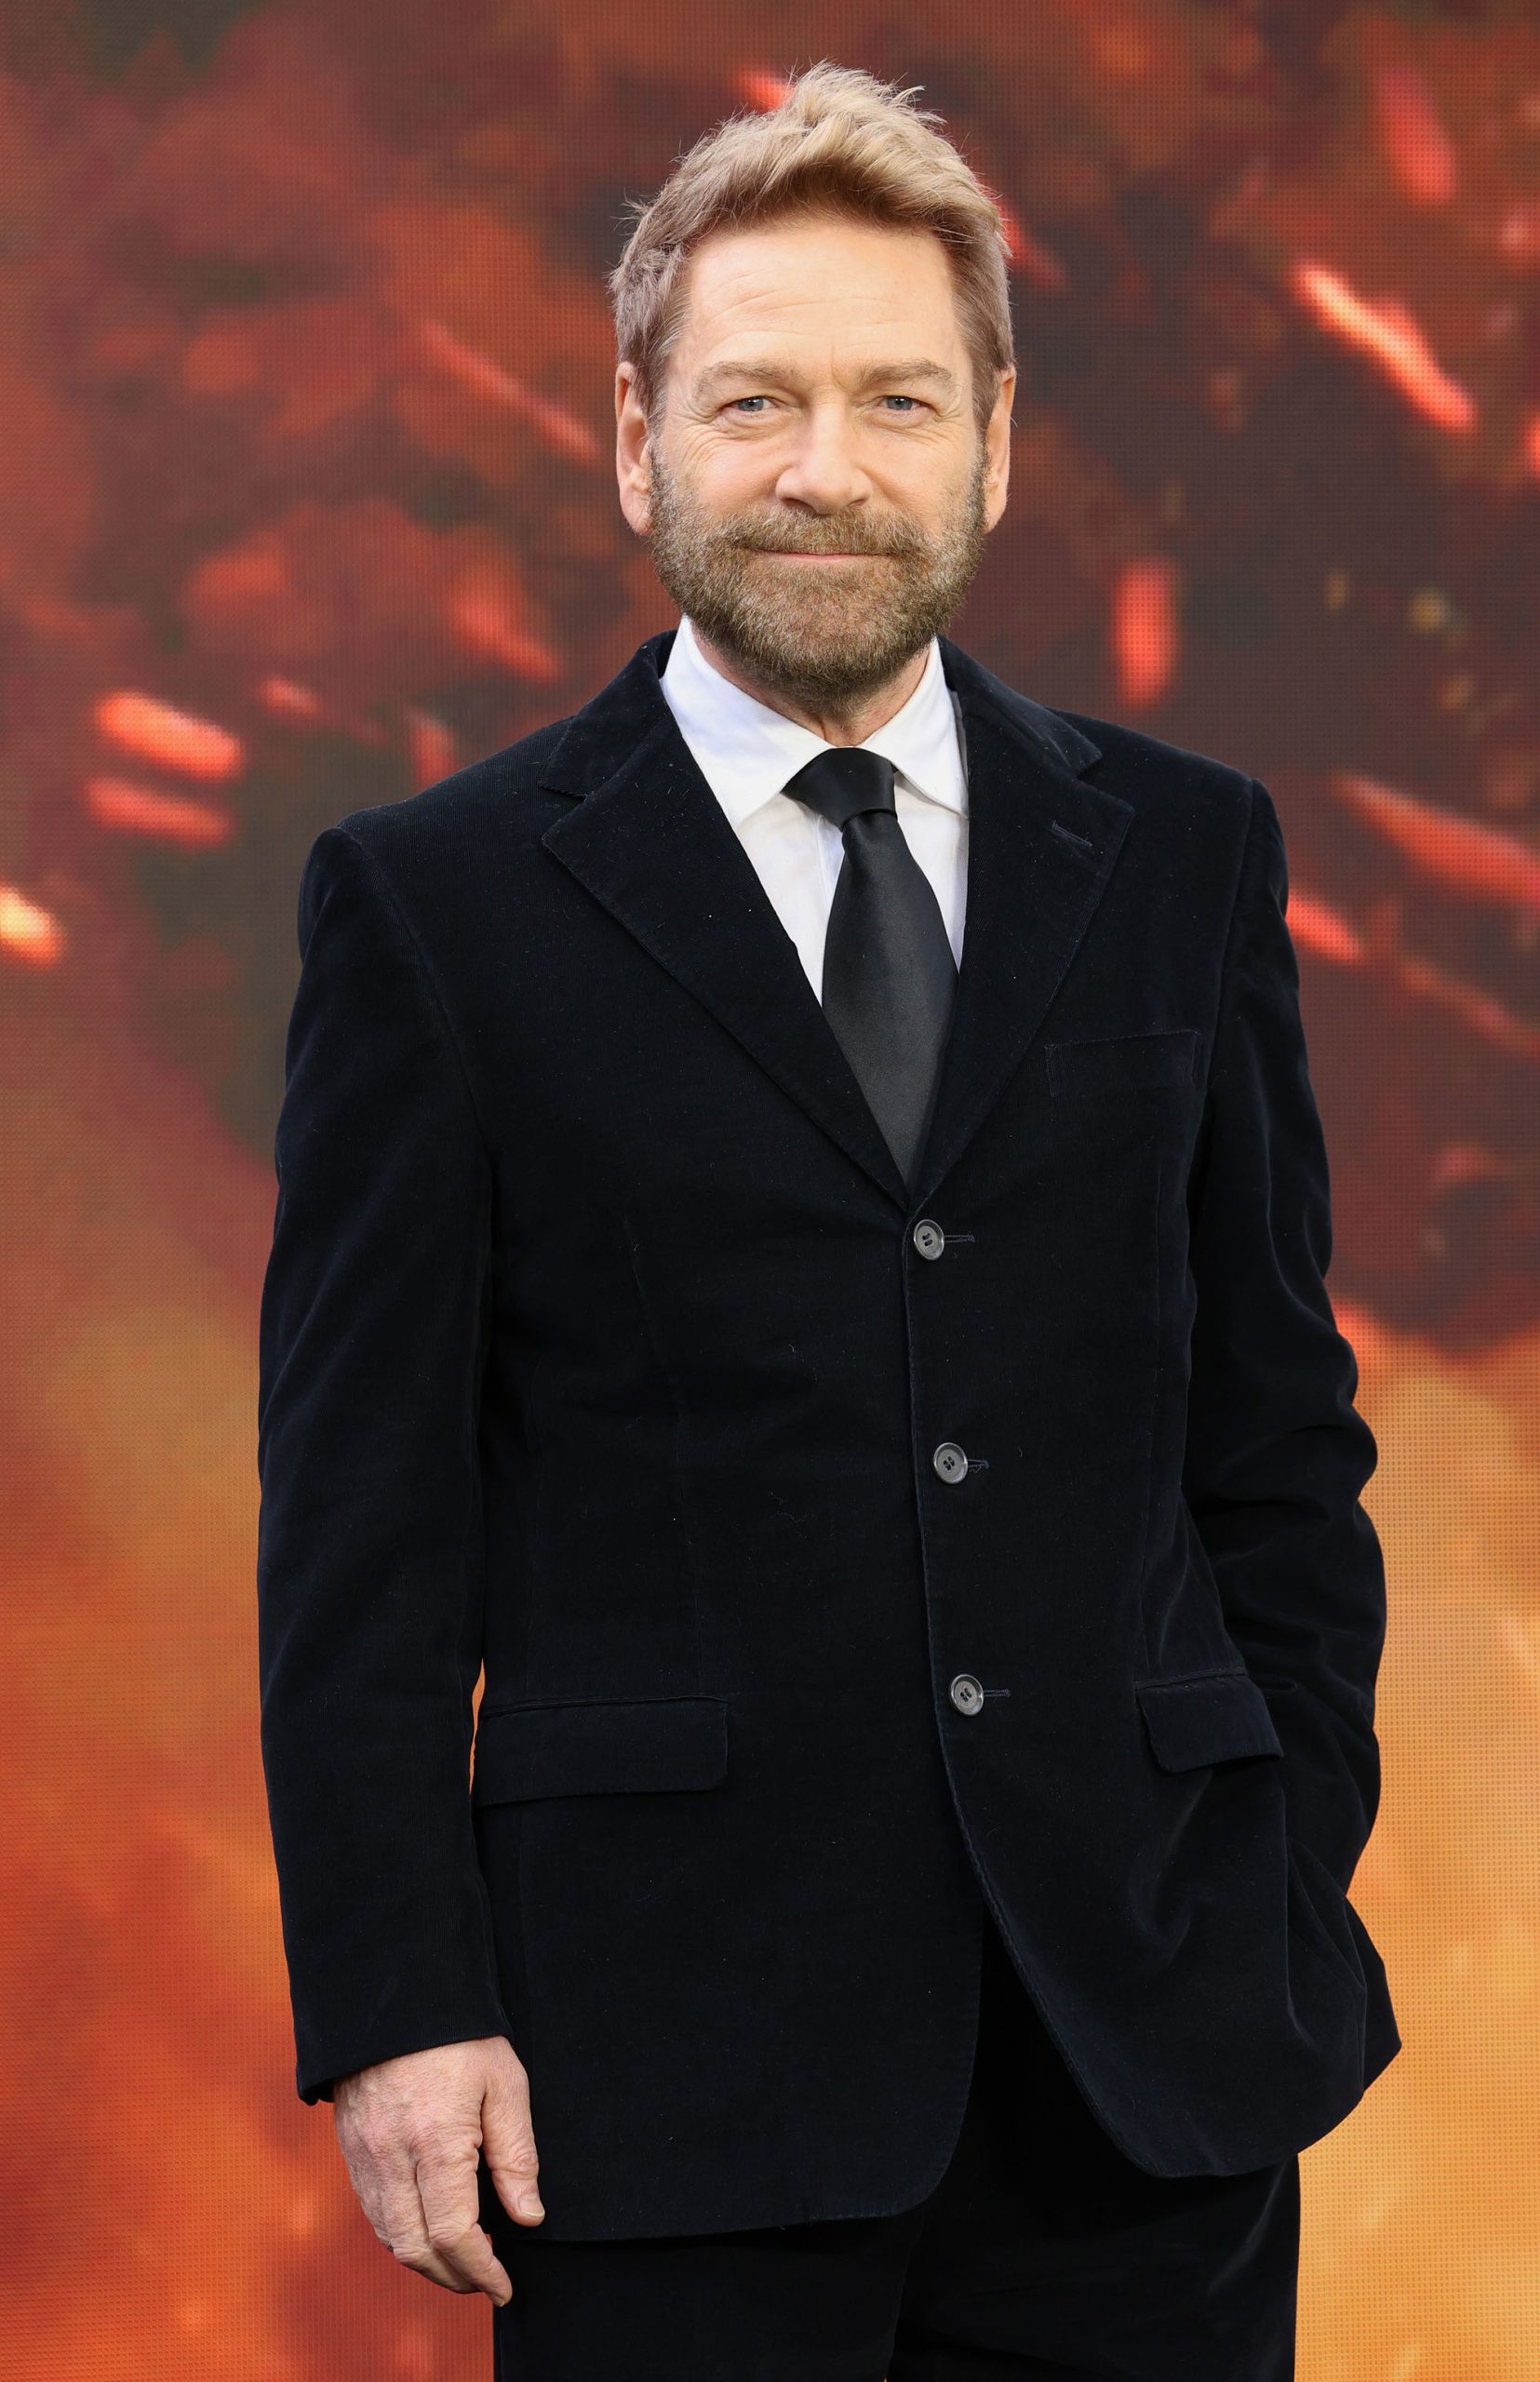 LONDON, ENGLAND - JULY 13: Kenneth Branagh attends the UK Premiere of "Oppenheimer" at Odeon Luxe Leicester Square on July 13, 2023 in London, England. (Photo by Lia Toby/Getty Images for Universal Pictures)